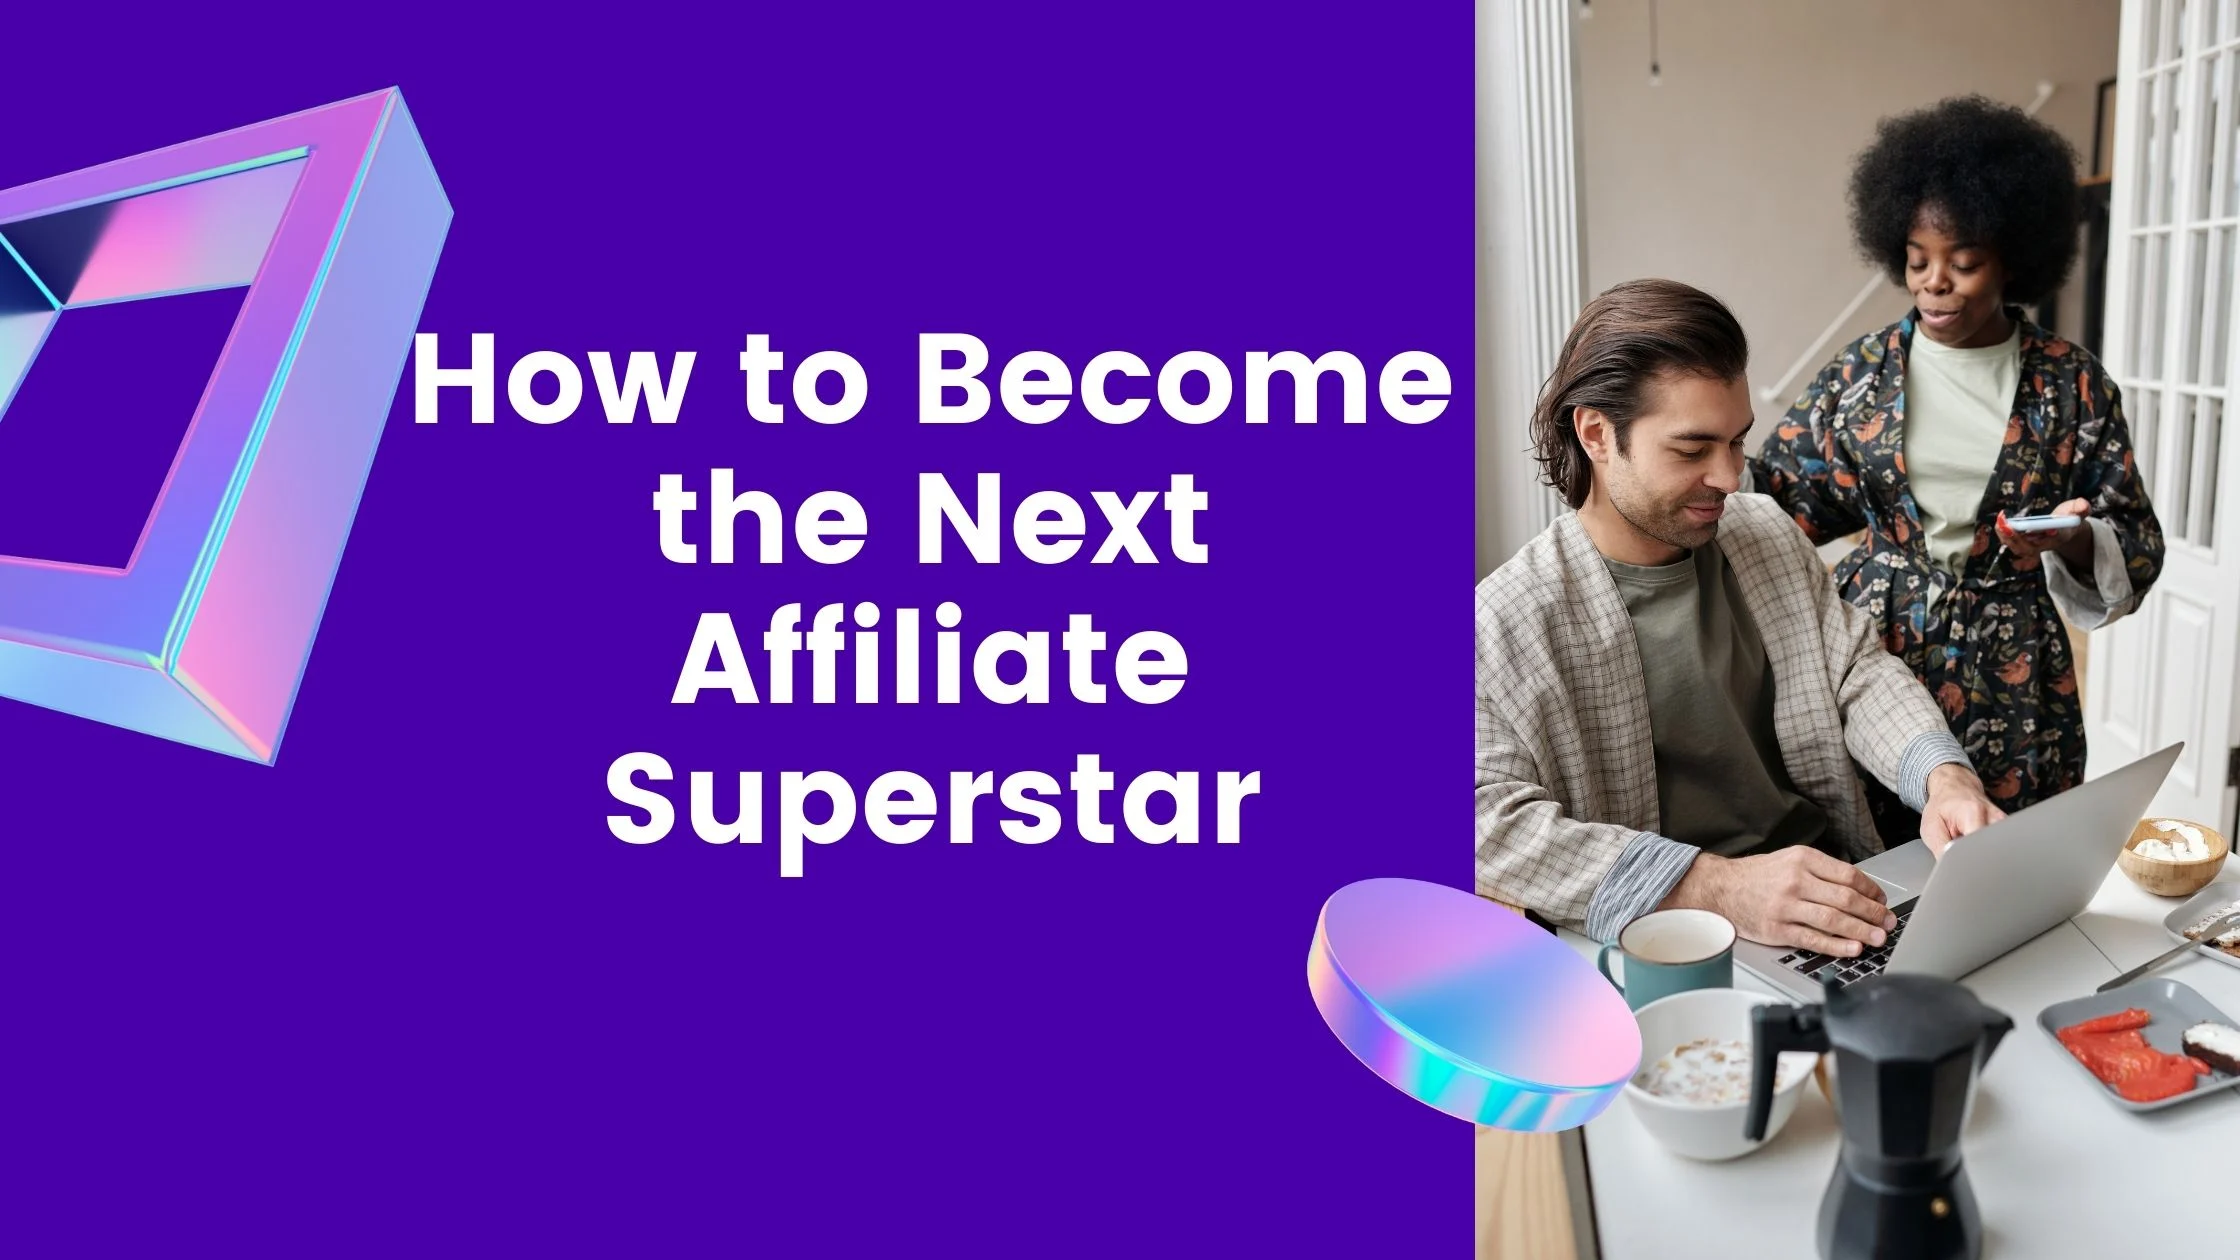 How to Become the Next Affiliate Superstar